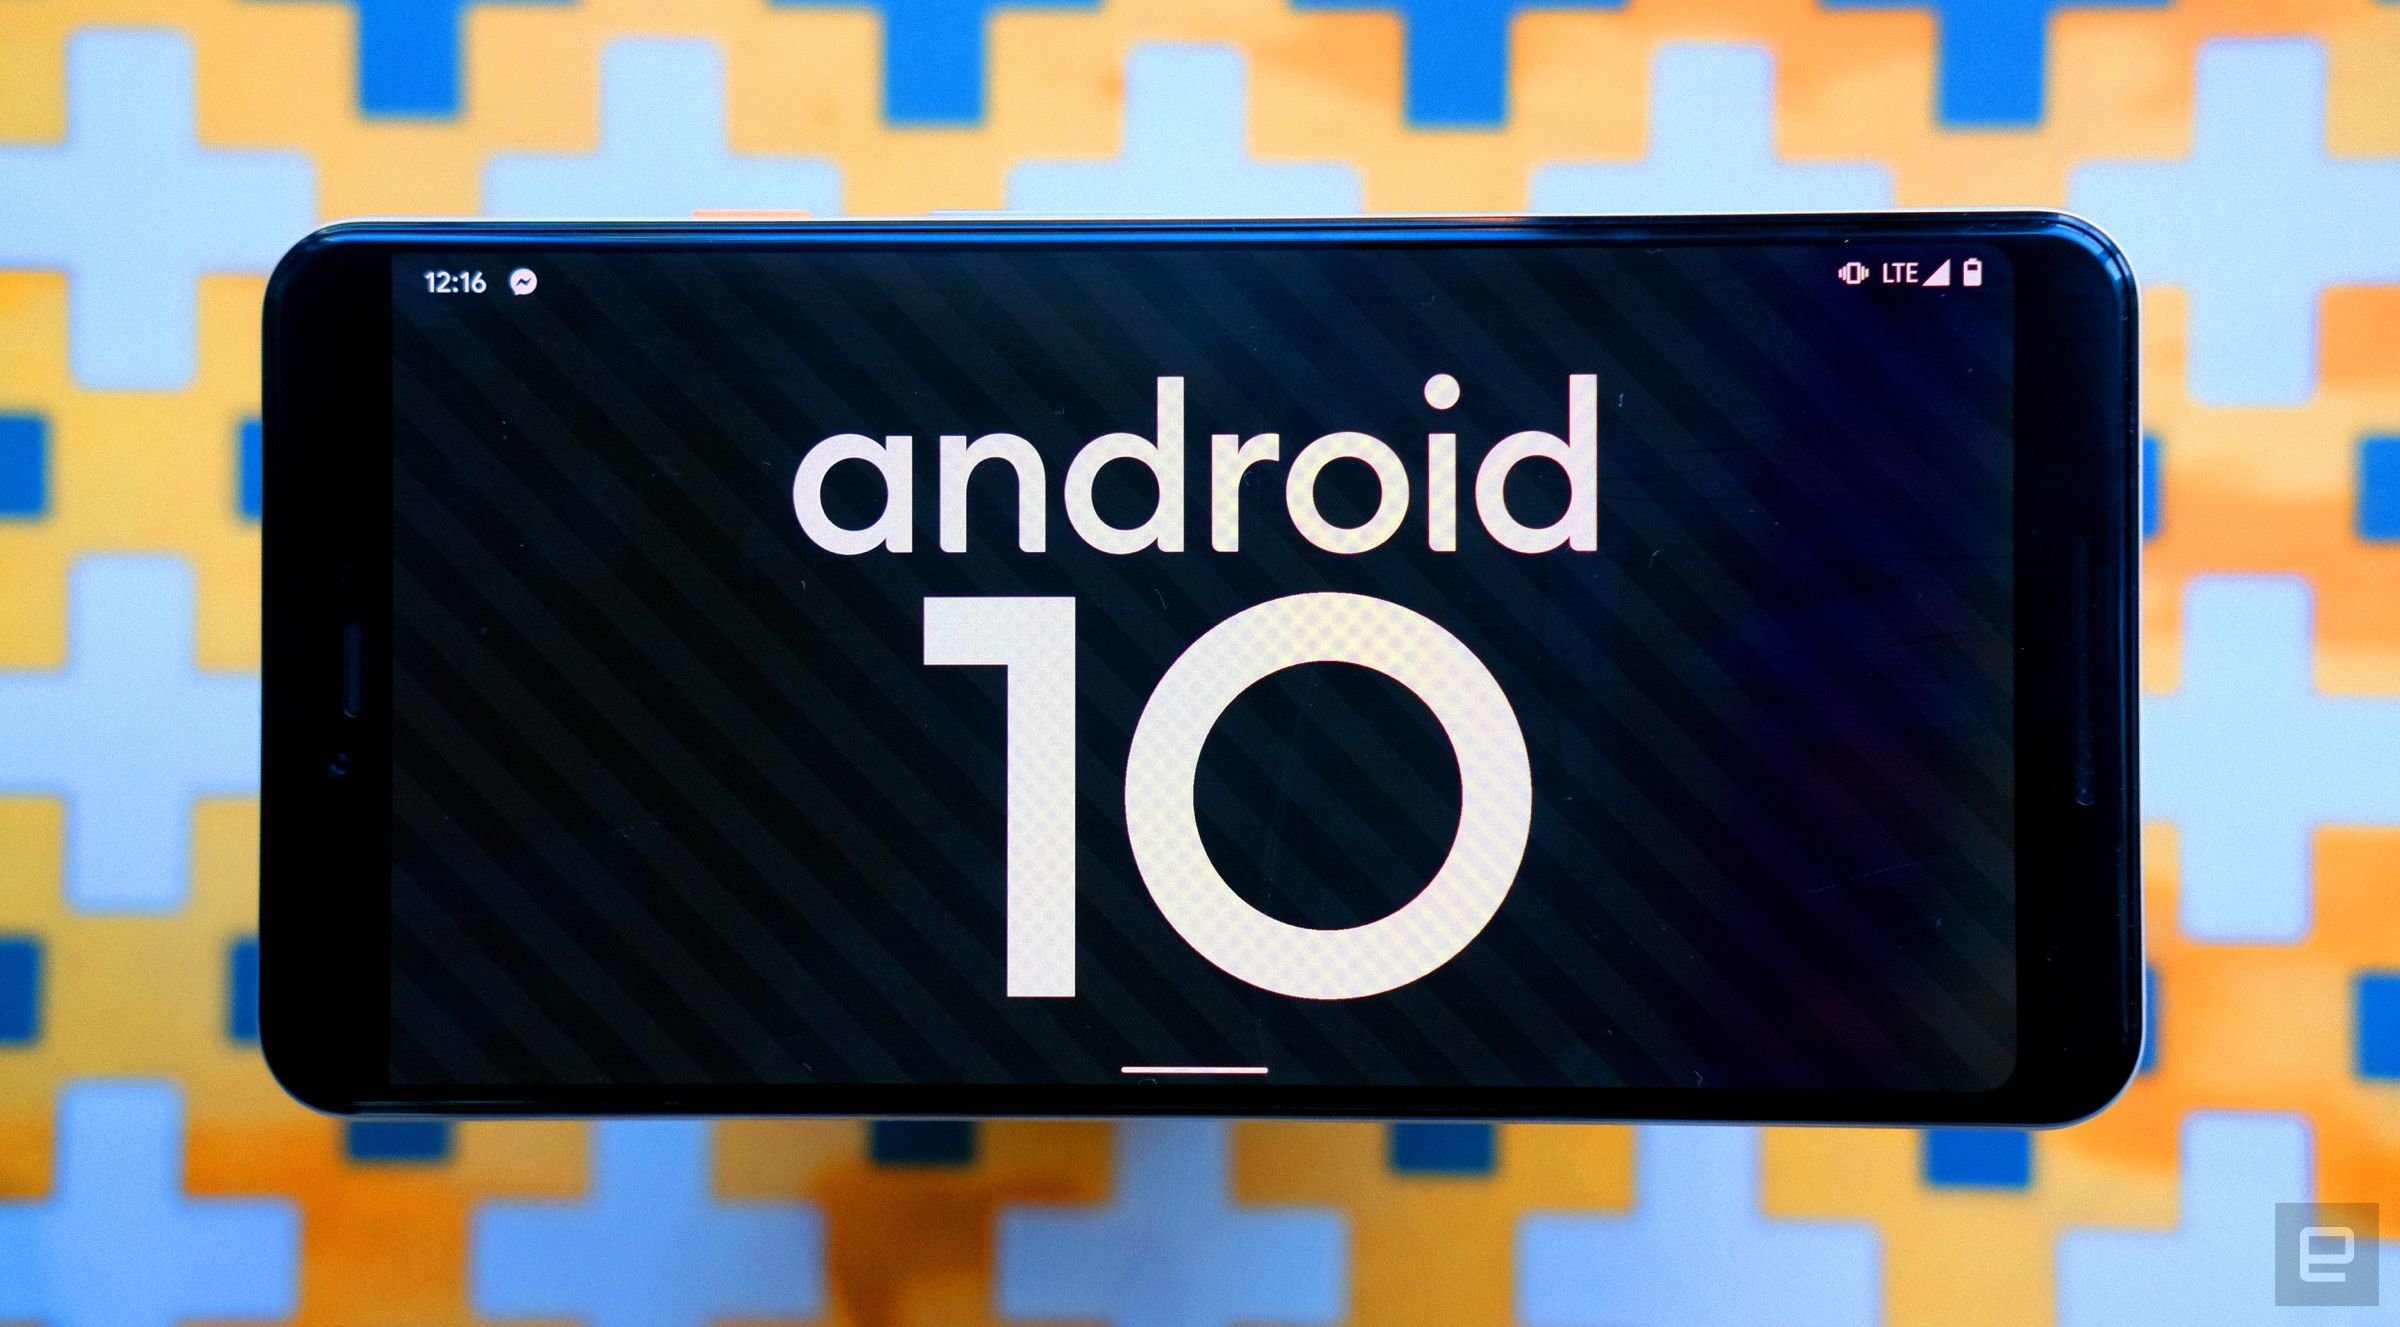 Android 10 Review It Isn’t Perfect Yet Better Than Android 9.0 Pie